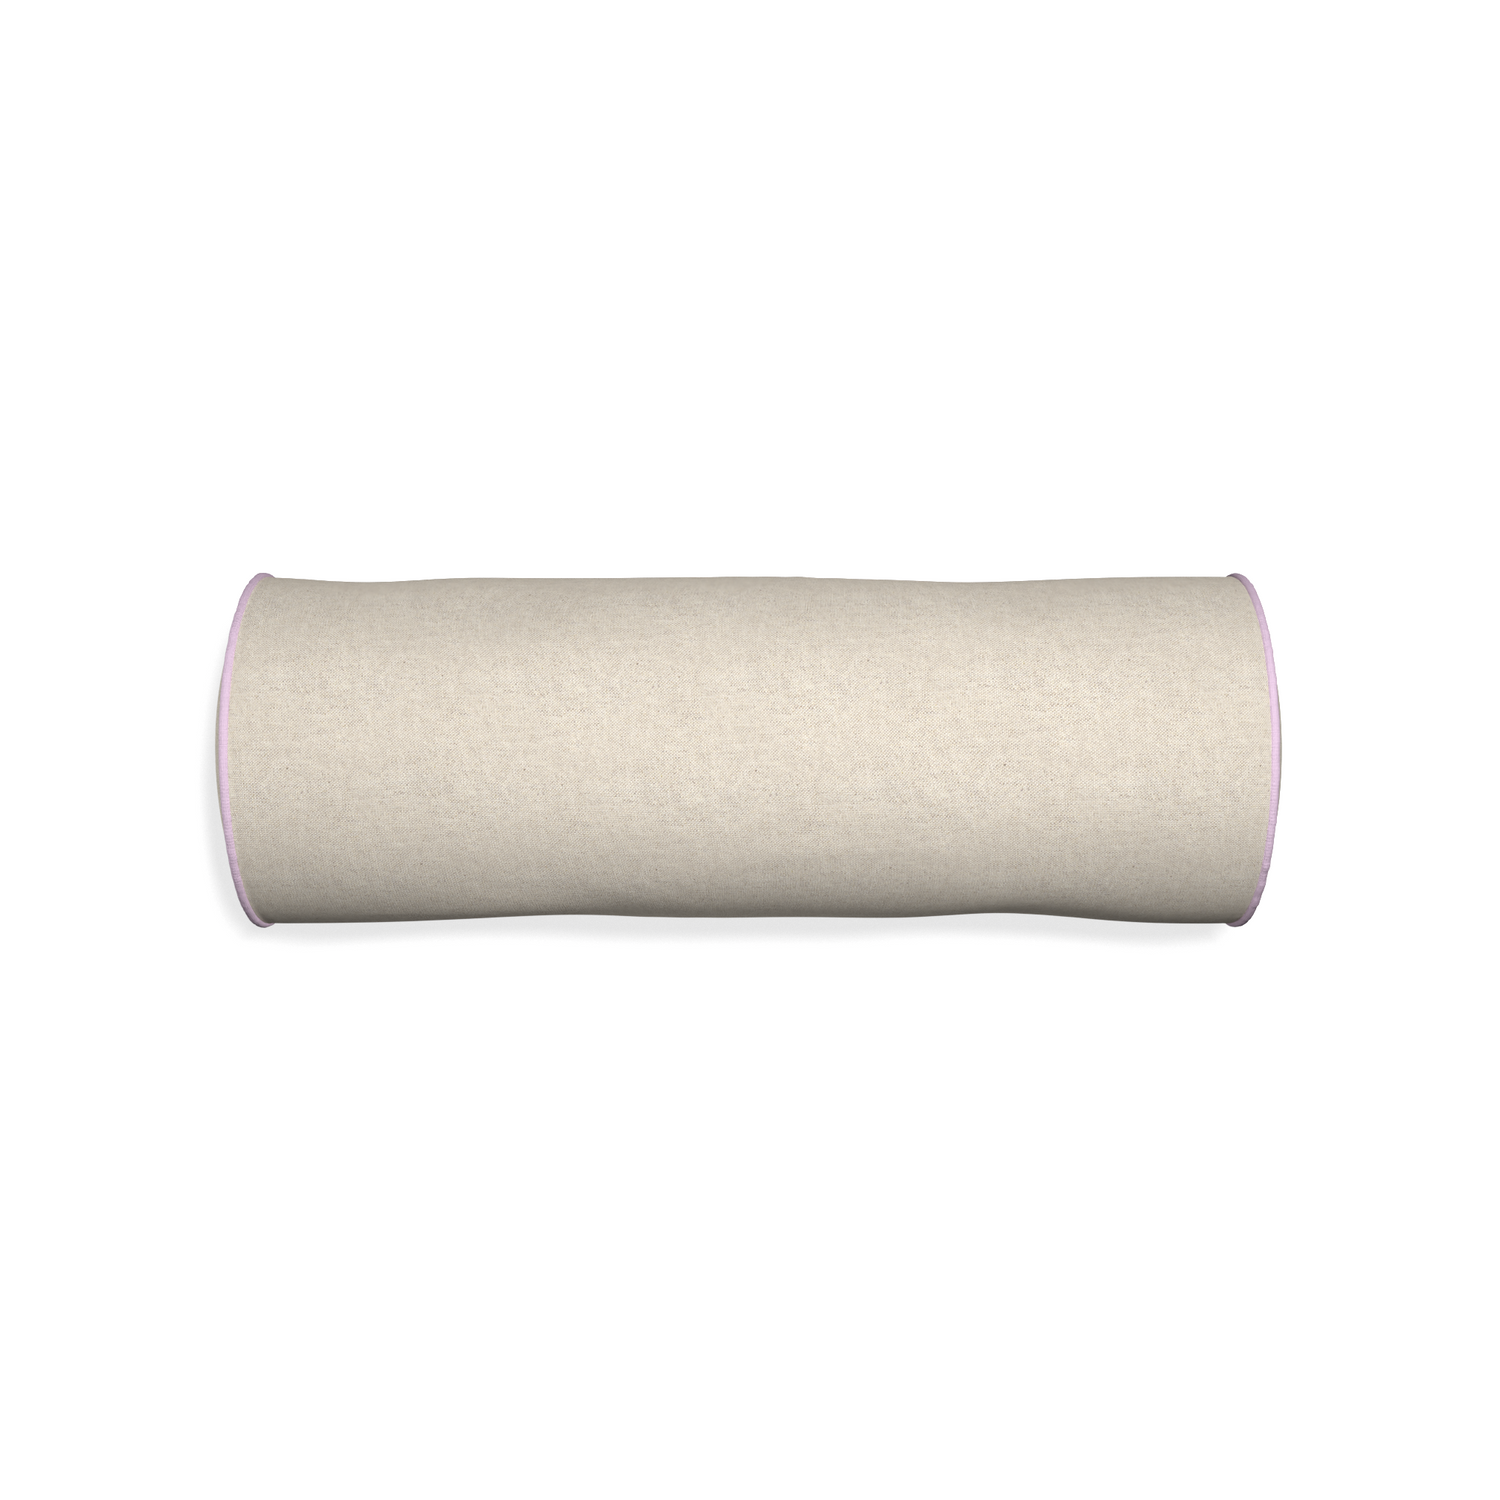 Bolster oat custom light brownpillow with l piping on white background